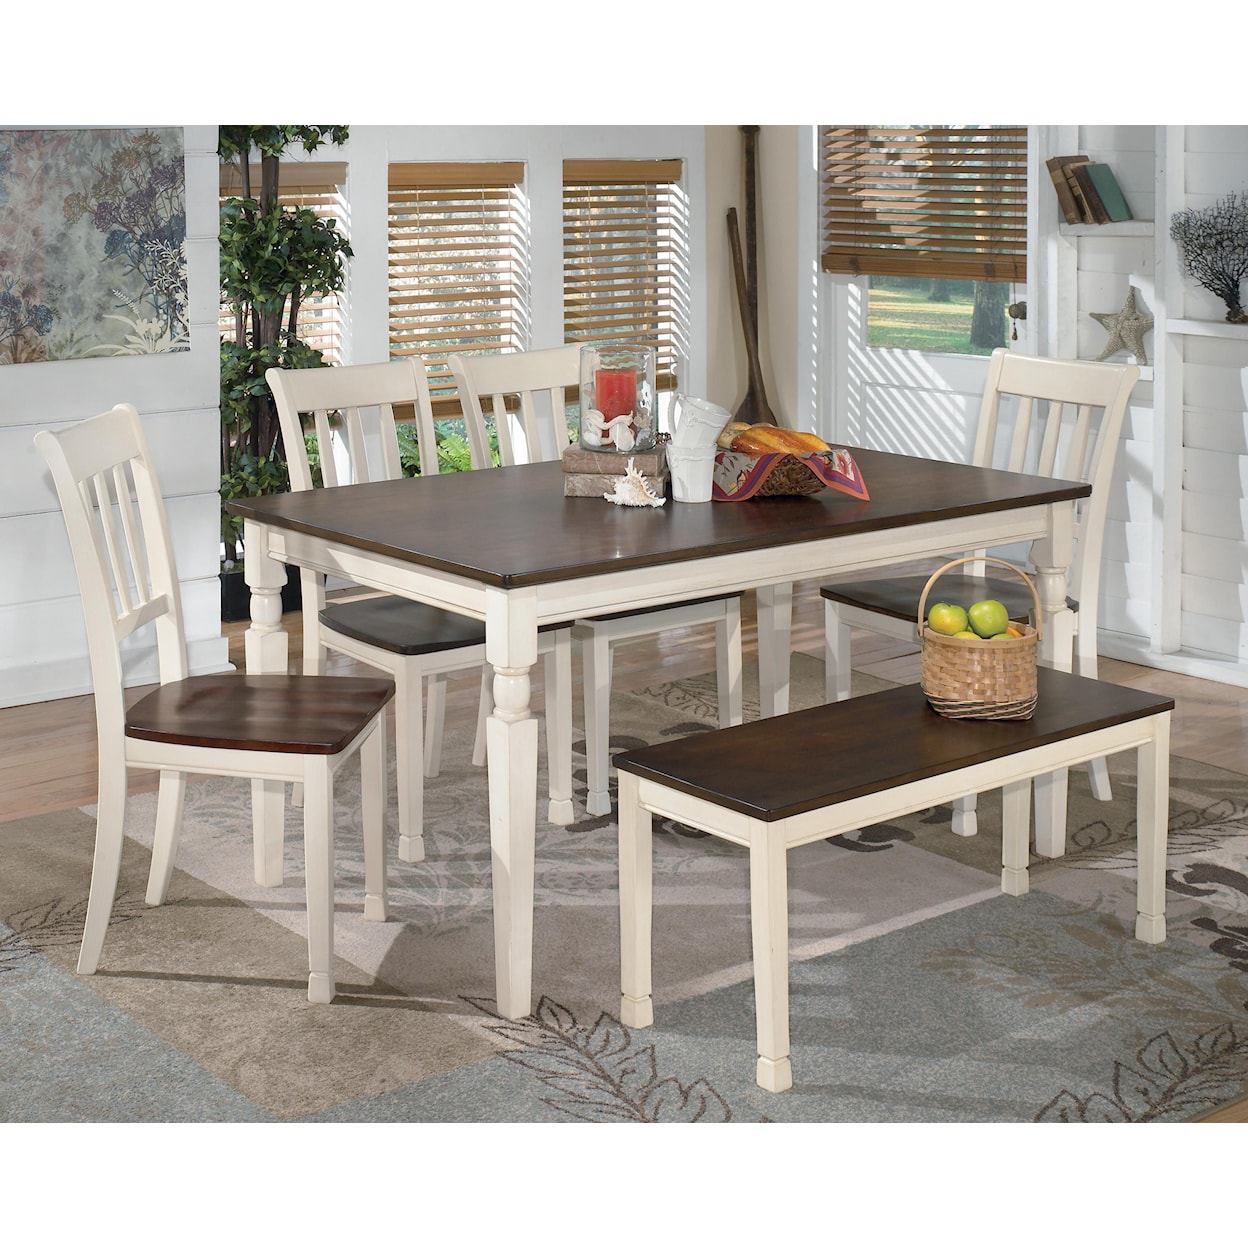 Signature Design by Ashley Whitesburg 6pc Dining Room Group